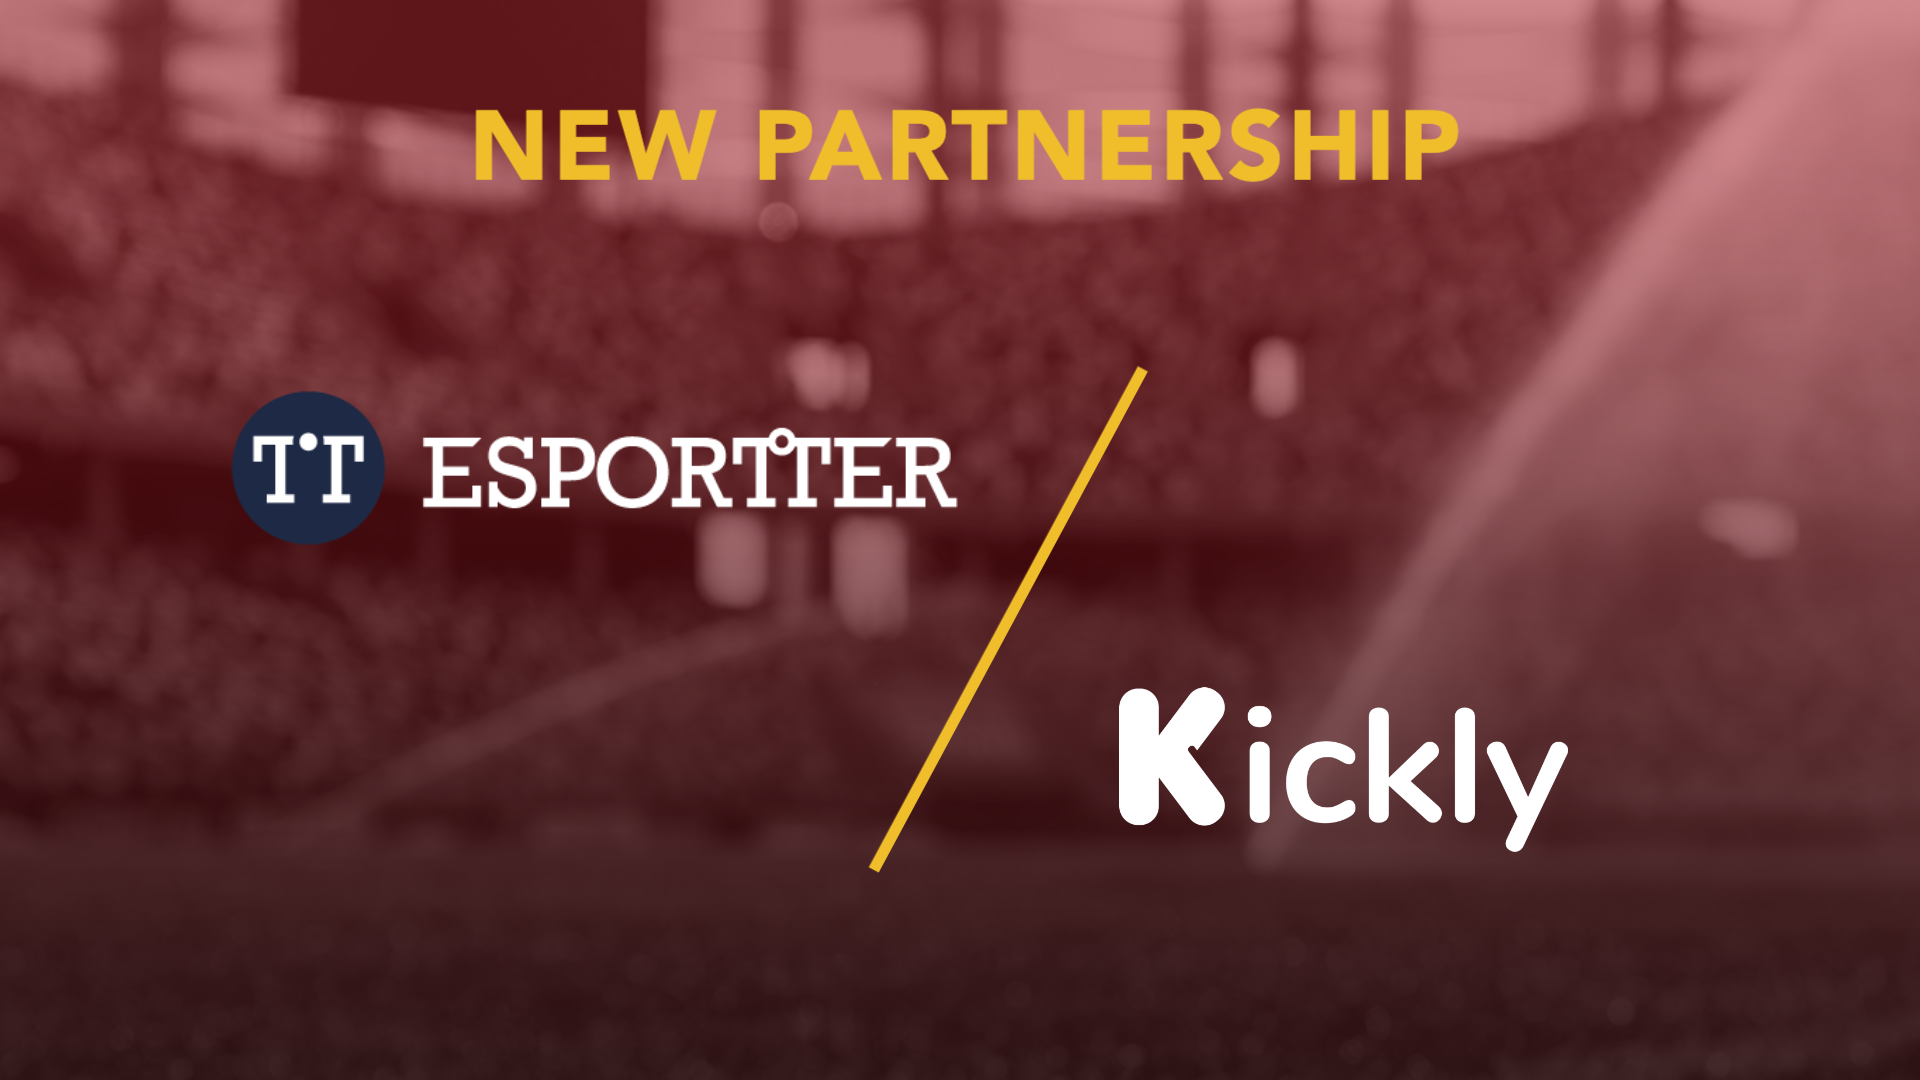 Kickly partners with Esportter to enter the Spanish market